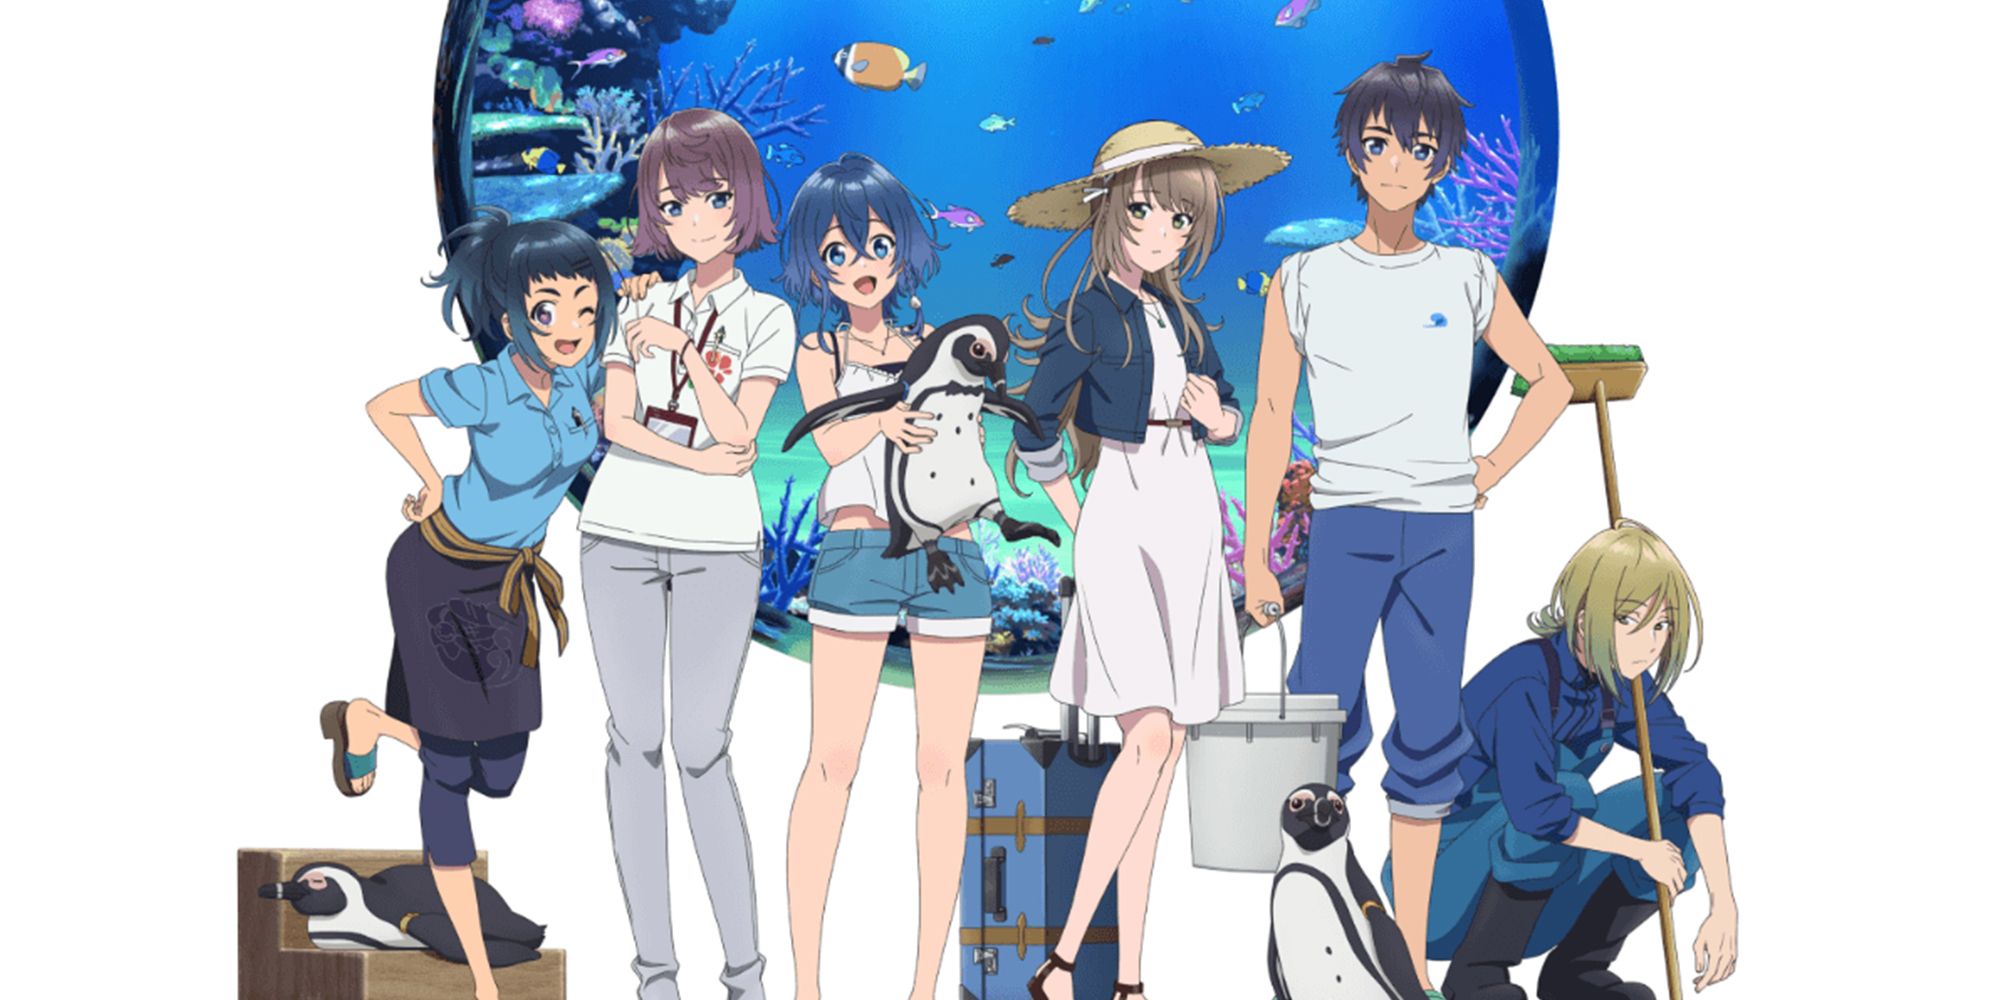 The Aquatope On White Sand - All Of The Main Cast Standing Together For The Cover Art In Front Of A Big Bubble Full Of Fish